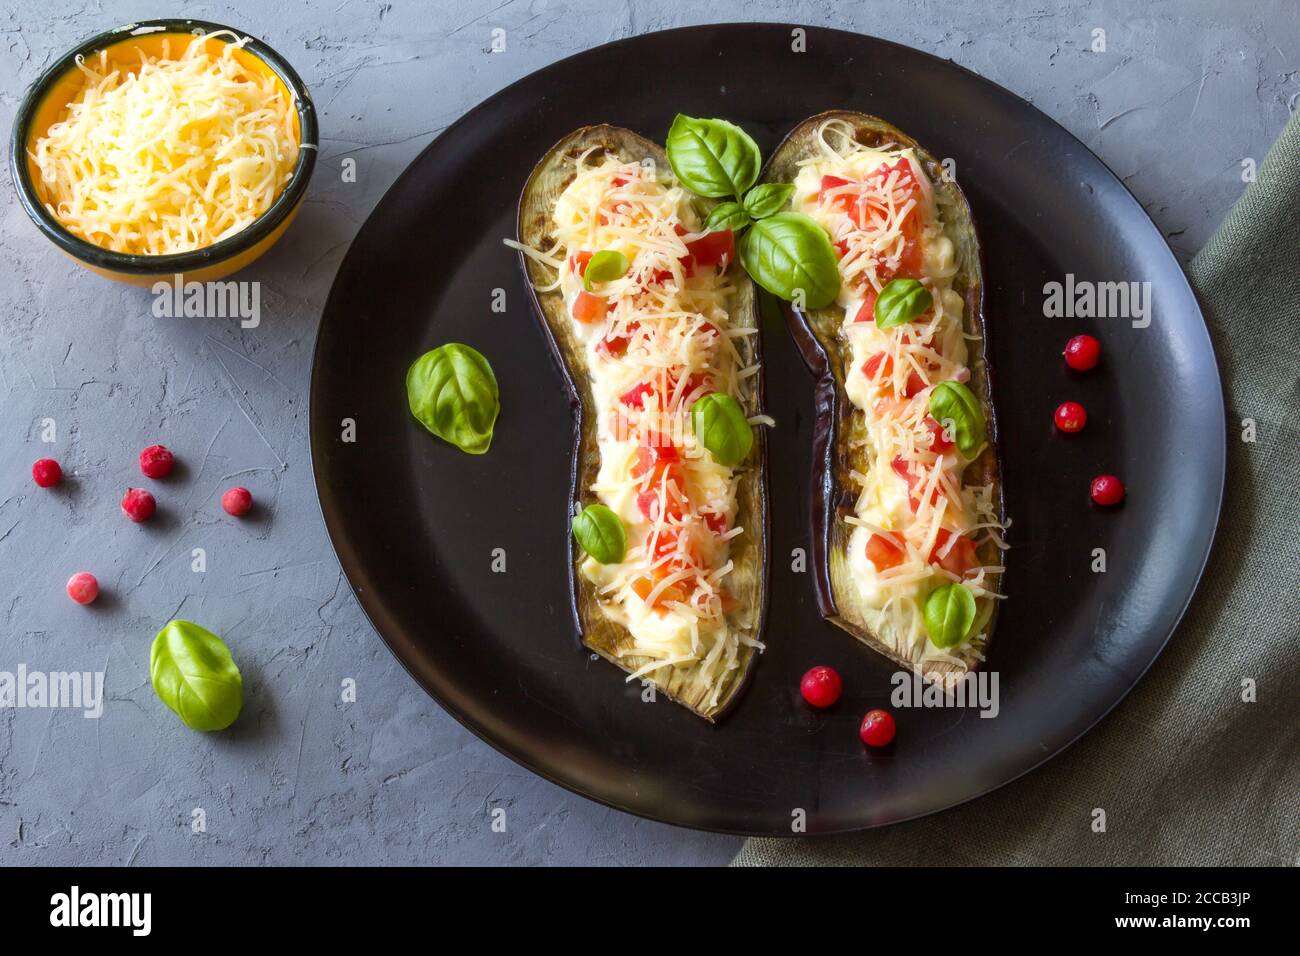 Eggplant stuffed with tomatoes, grated cheese and cranberries, garnished with Basil on a dark plate over gray slate Stock Photo